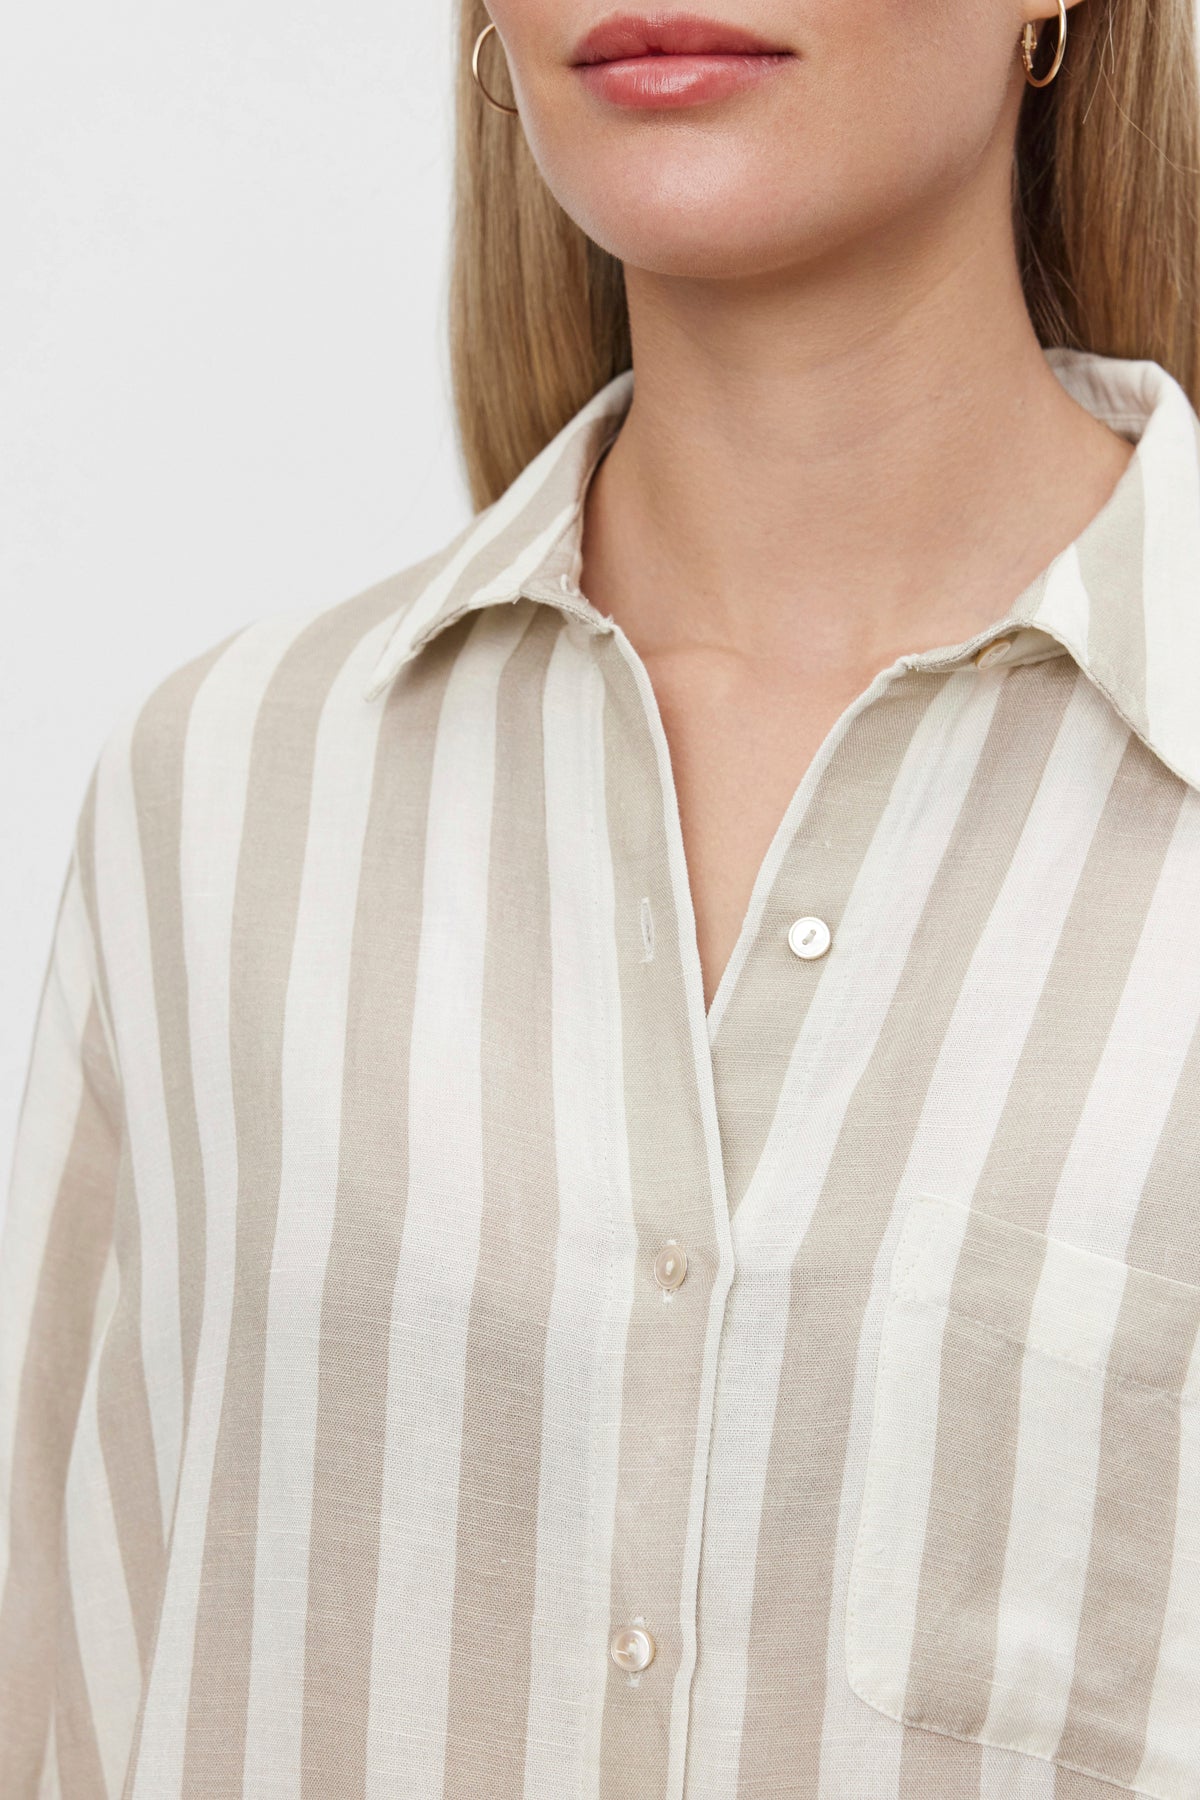   A person wearing the HARLOW STRIPED LINEN BUTTON-UP SHIRT by Velvet by Graham & Spencer. The beige and white vertically striped shirt features a collar, and its relaxed fit complements the timeless stripes perfectly. The person's face is partially visible, with focus on the upper torso and shirt details. 